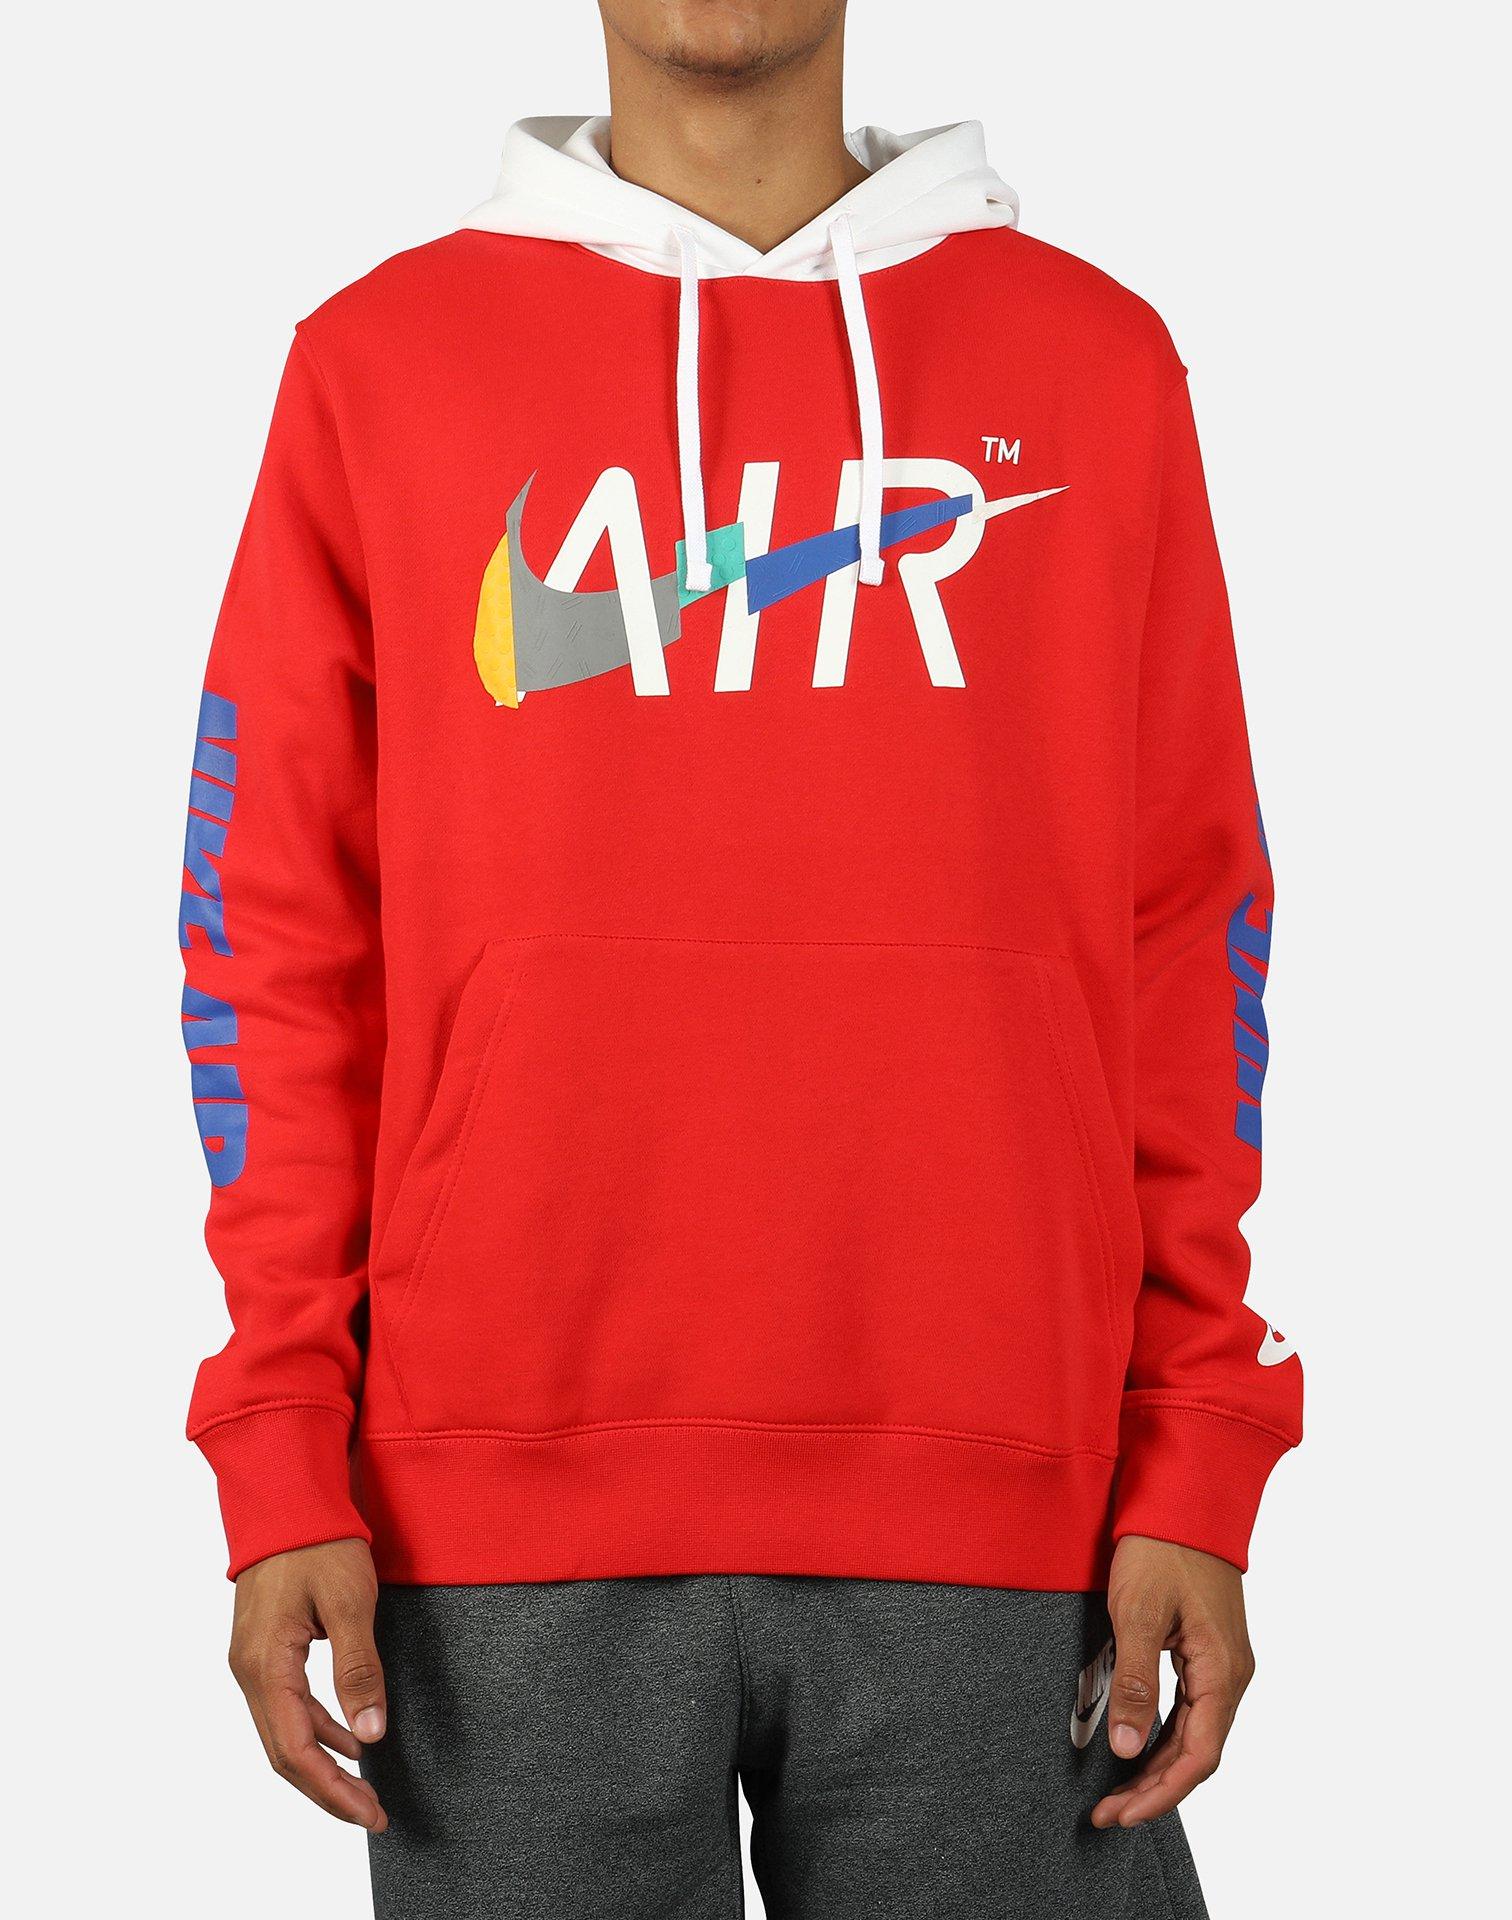 Nike Fleece Nsw Game Changer Pullover Hoodie in Red for Men - Lyst